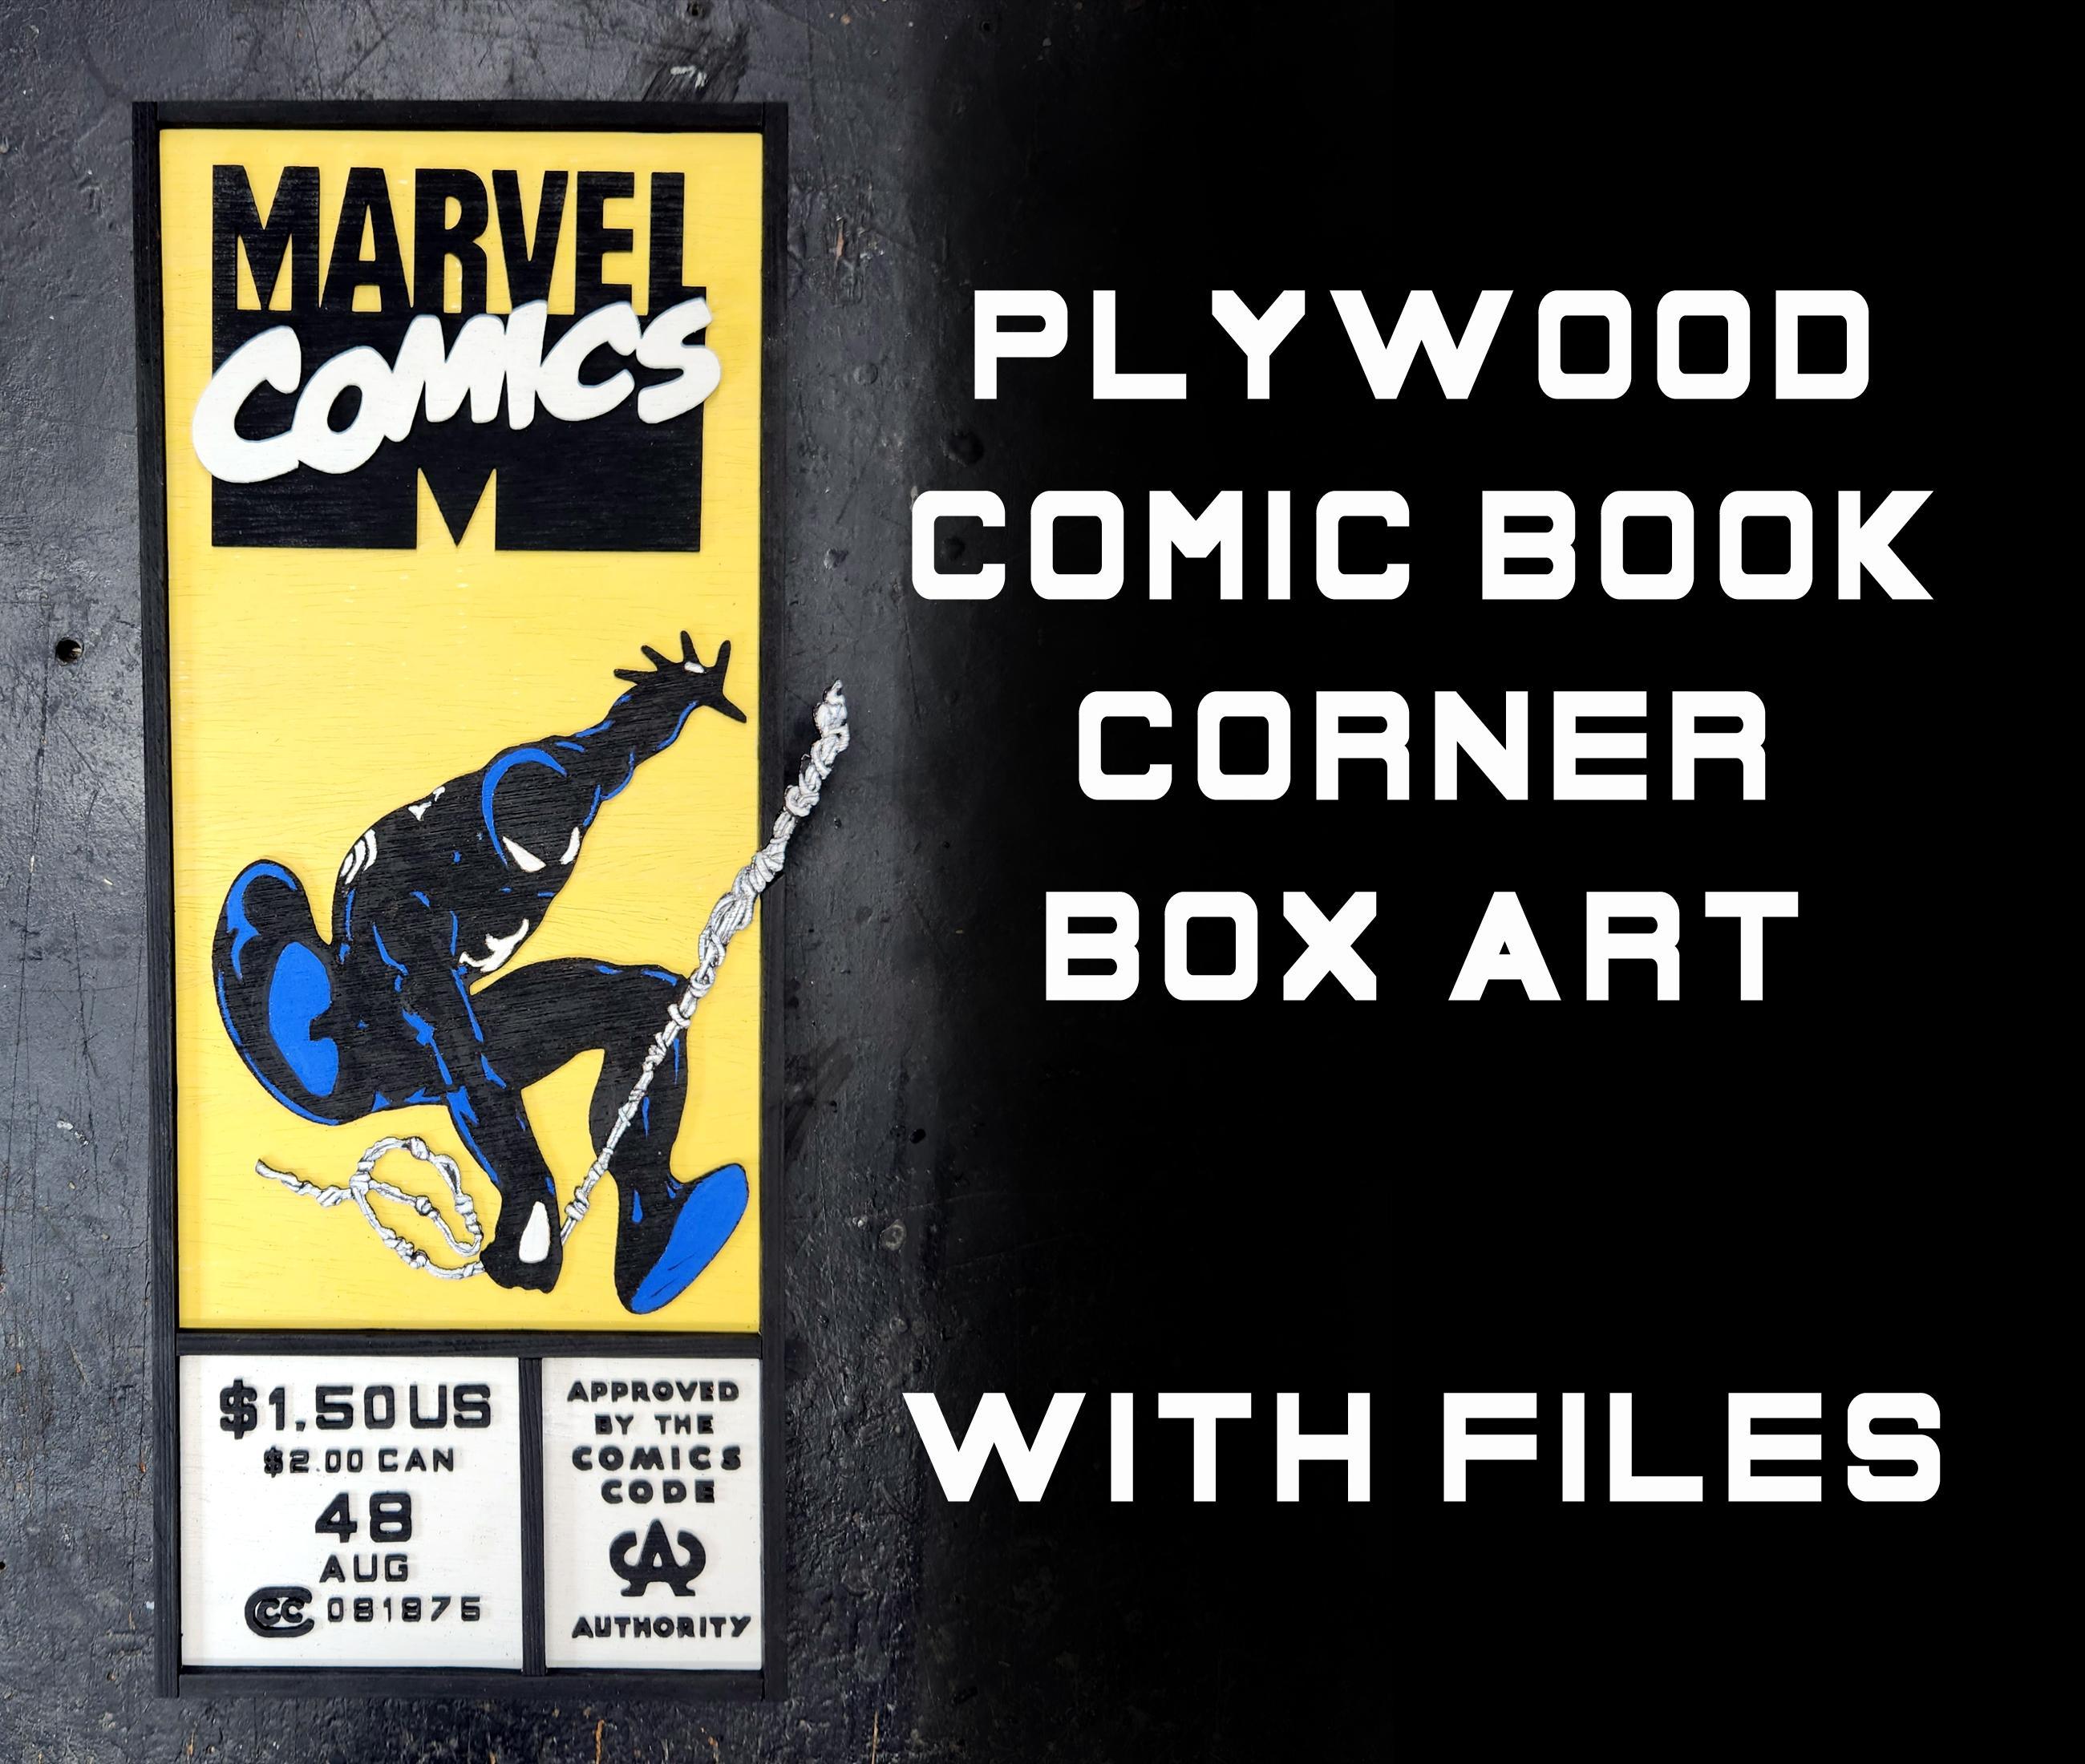 Plywood Comic Book Corner Art - Laser Engraver Project - With Files